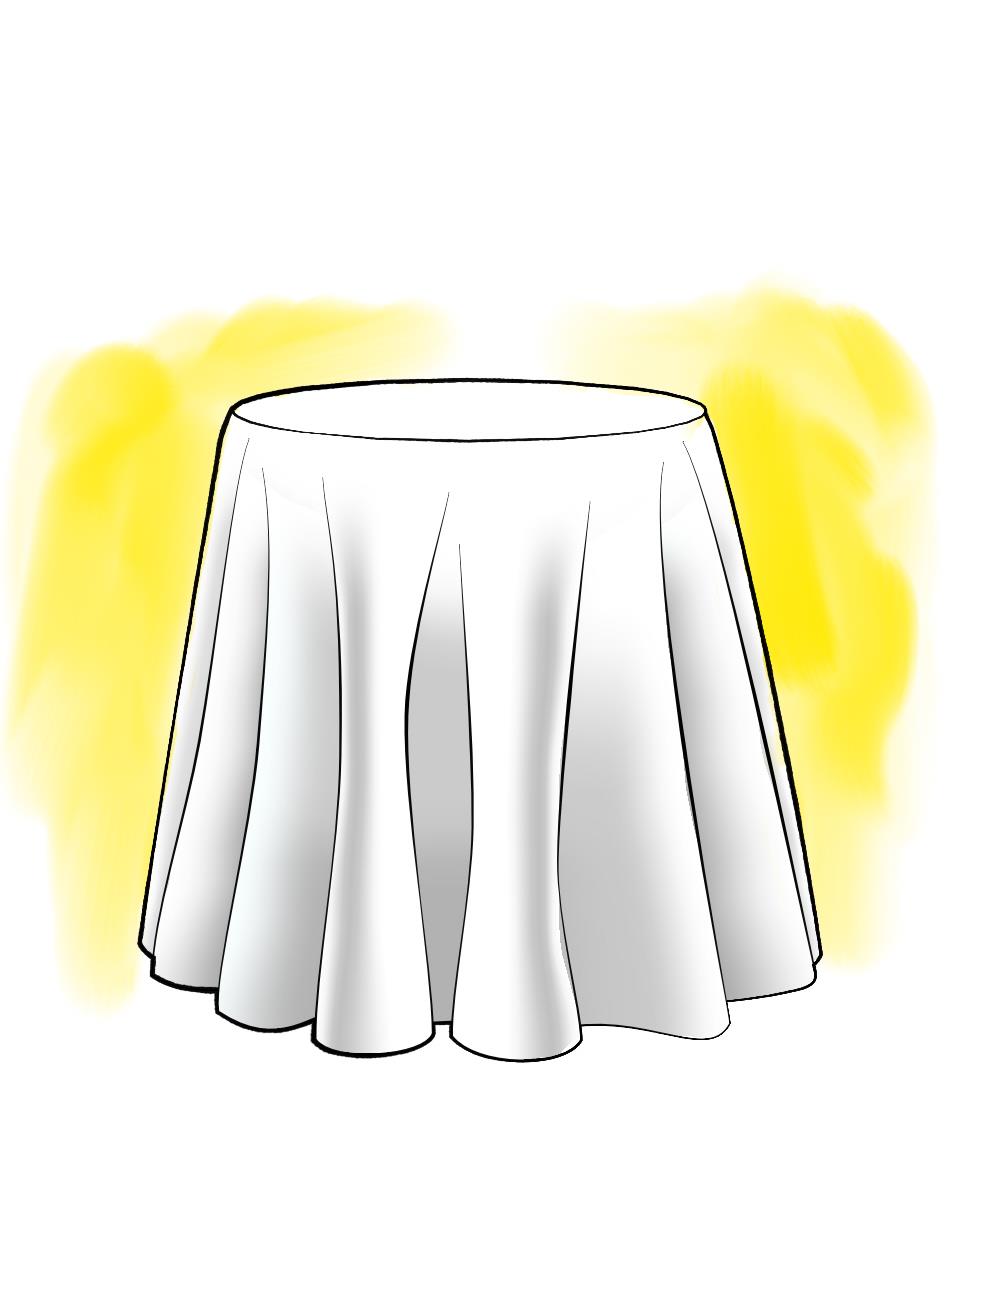 round tablecloth in Classic Orchid Lavender Ticking Stripe on White